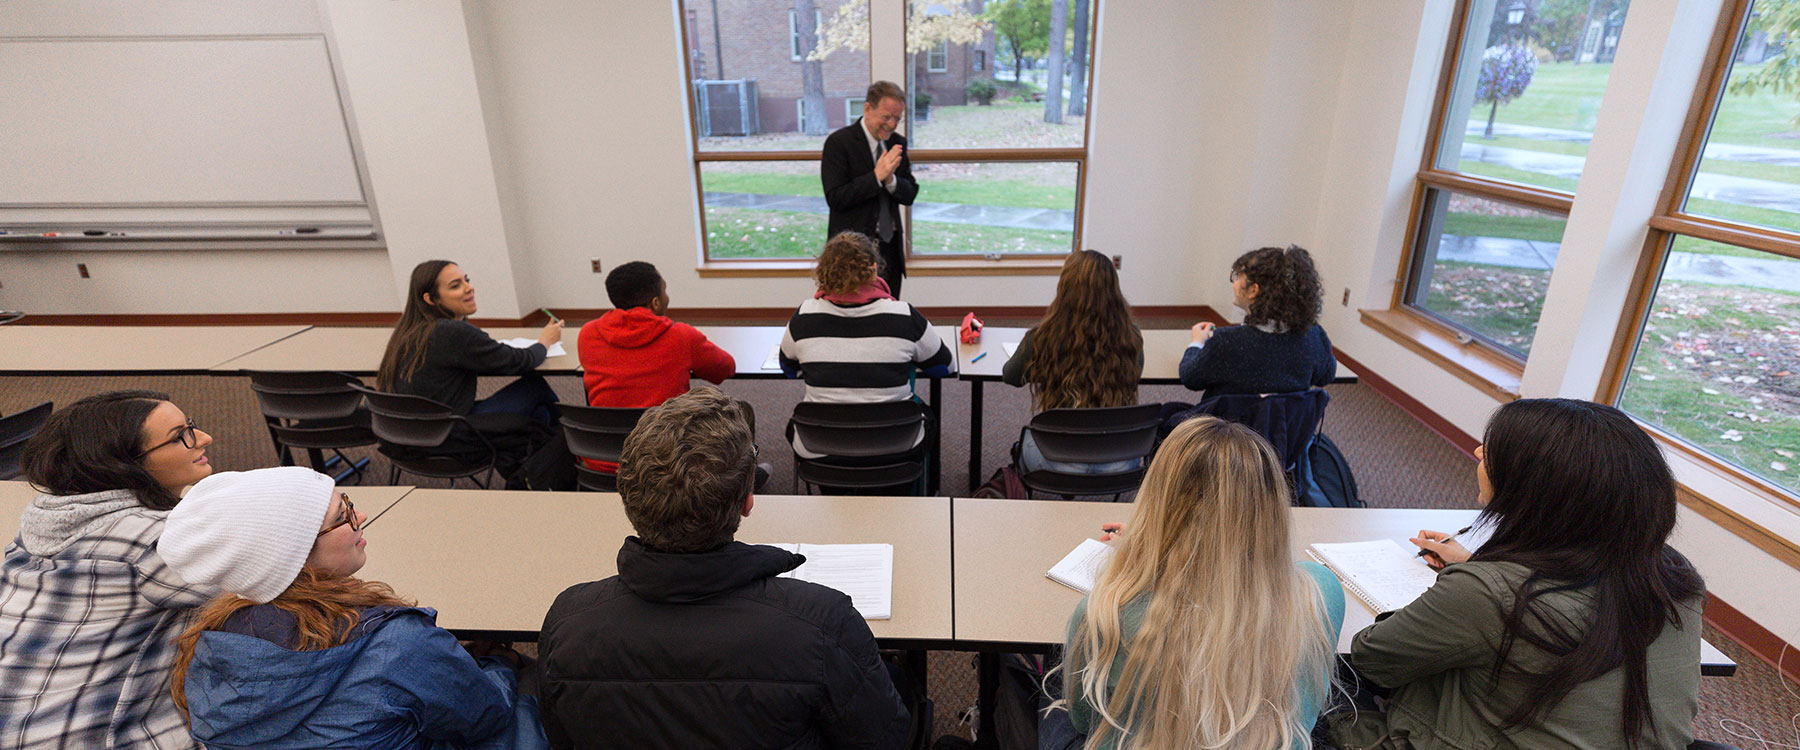 A professor laughs and claps his hands while addressing a group of students in a classroom.